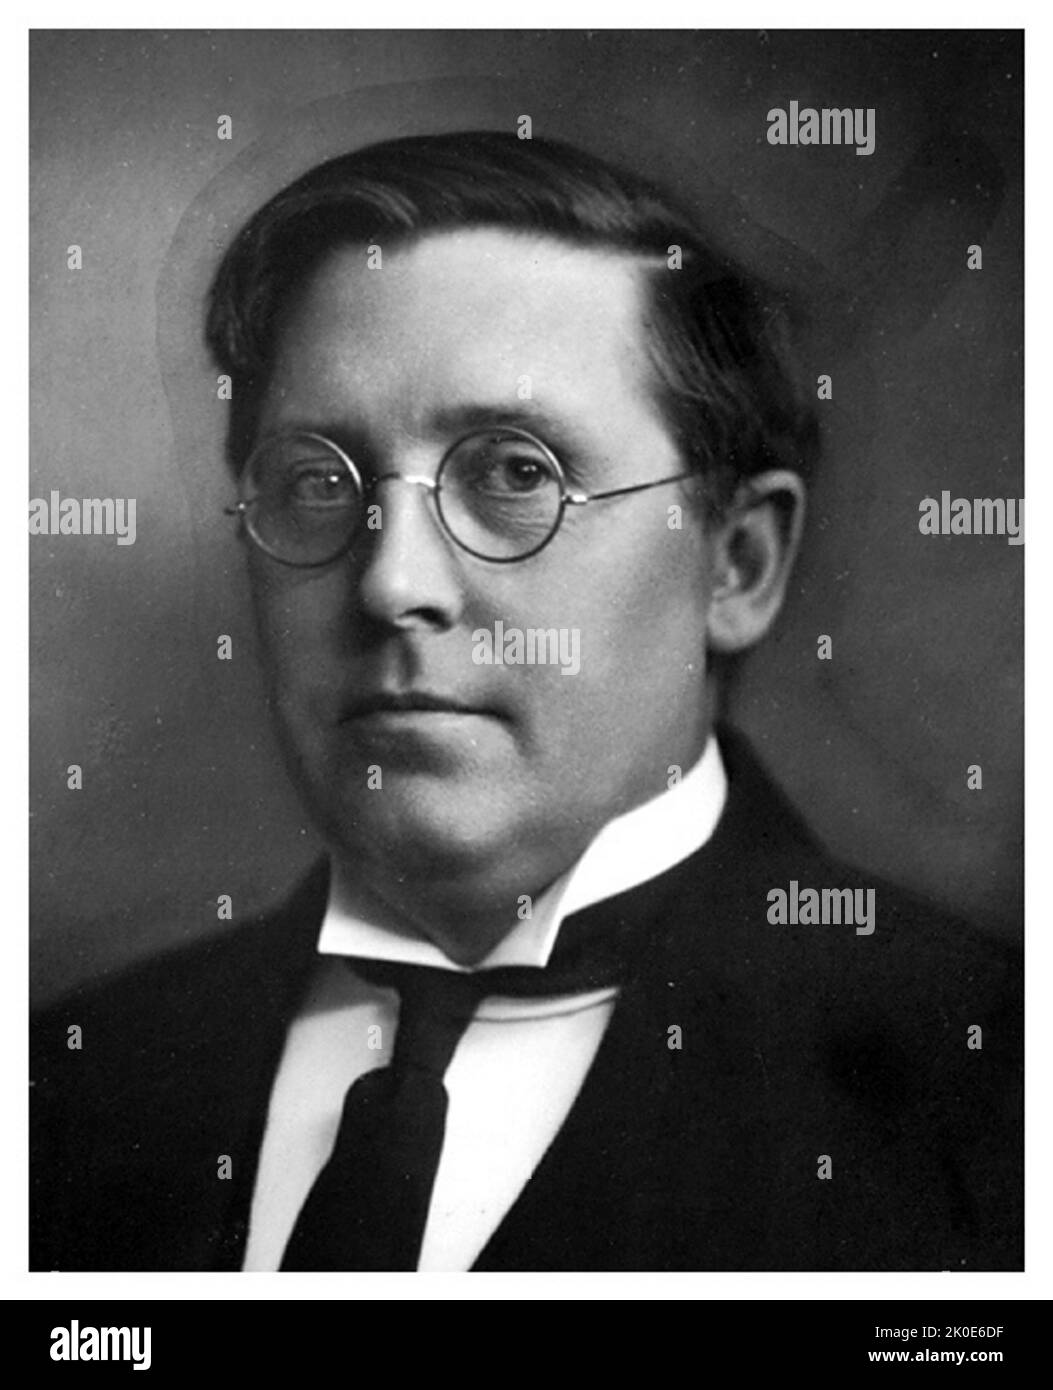 Tryggvi Þorhallsson (9 February 1889 - 31 July 1935) was Prime Minister of Iceland from 28 August 1927 to 3 June 1932. He was a member of the Progressive Party. He was the Minister of Finance of Iceland from 1928 to 1929 and in 1931. Stock Photo